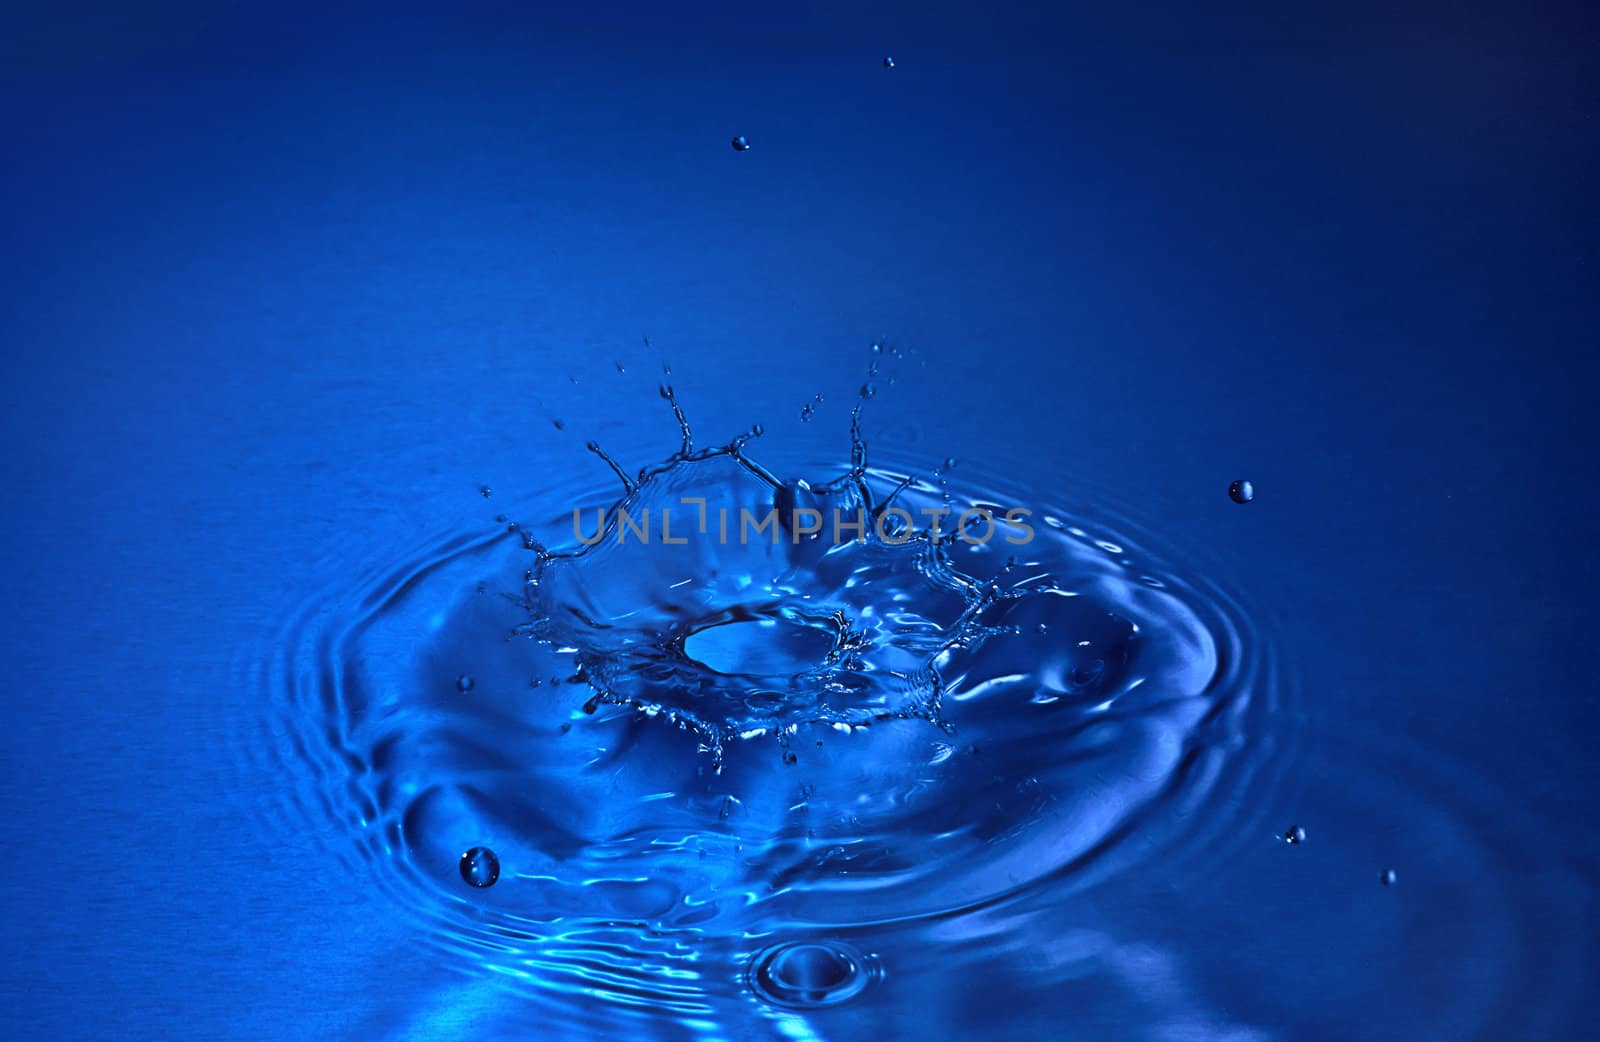 Falling drops of water. Splash effect after collision a falling drop with water surface.